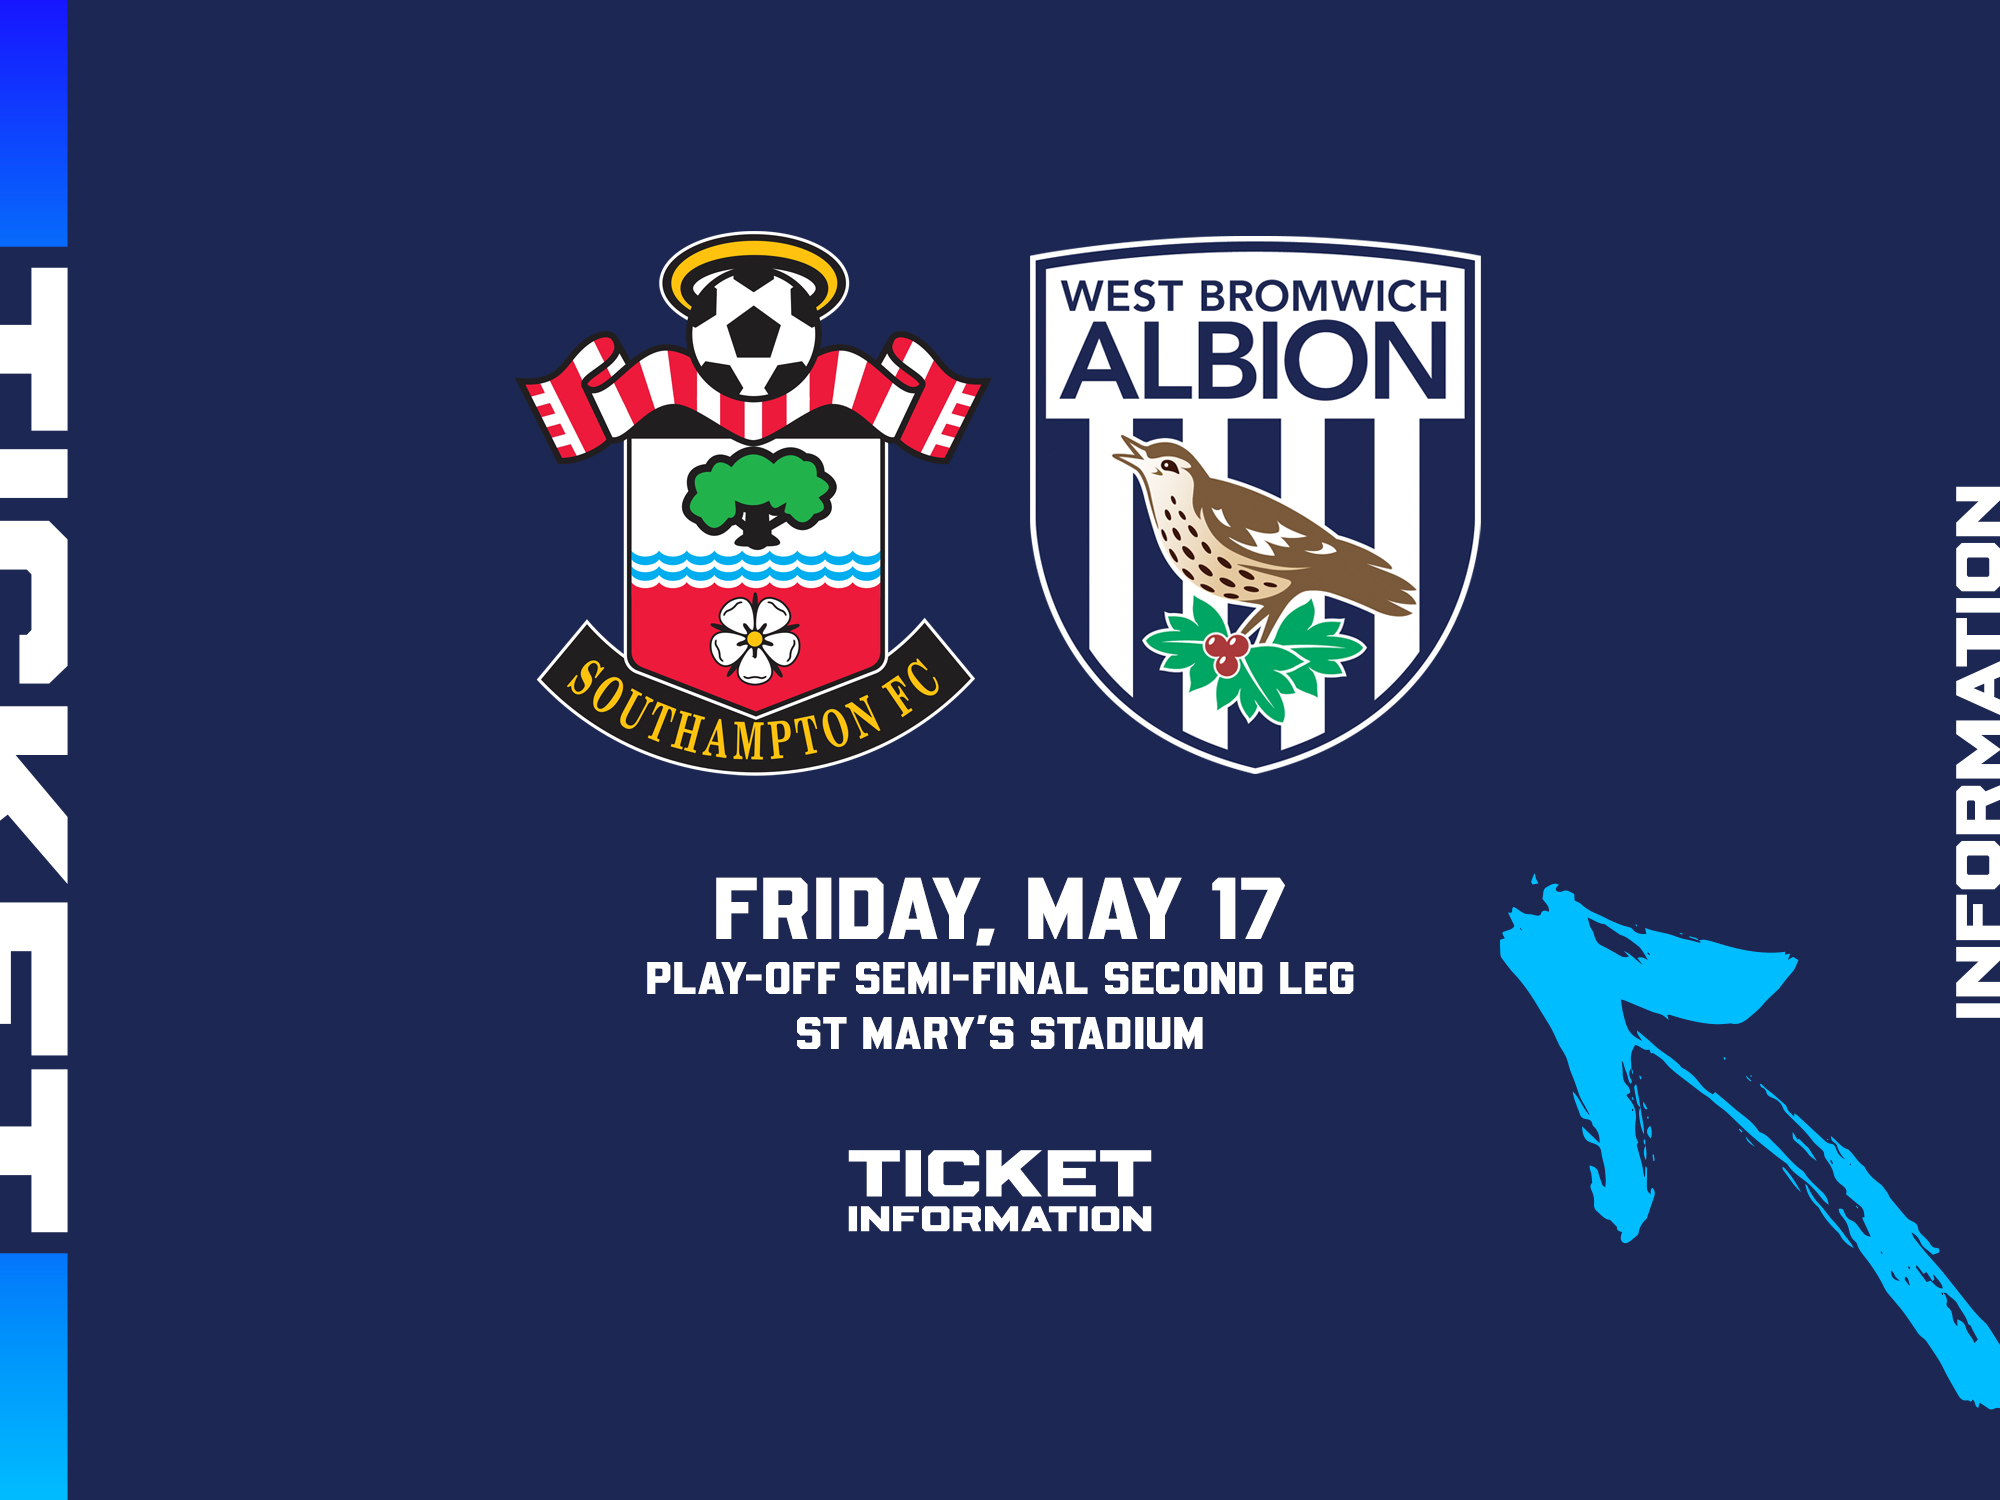 A ticket graphic displaying information for Albion's play off semi final second leg against Southampton